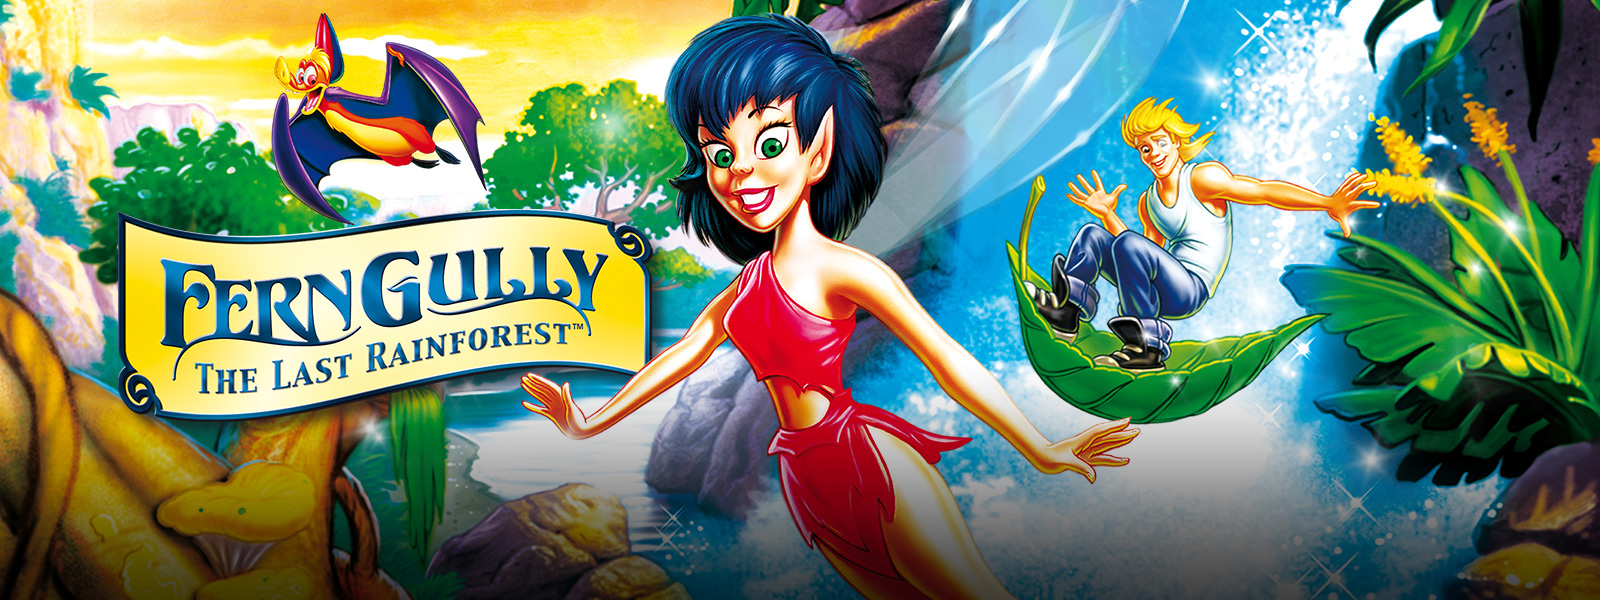 Ferngully: The Last Rainforest Backgrounds, Compatible - PC, Mobile, Gadgets| 1600x600 px